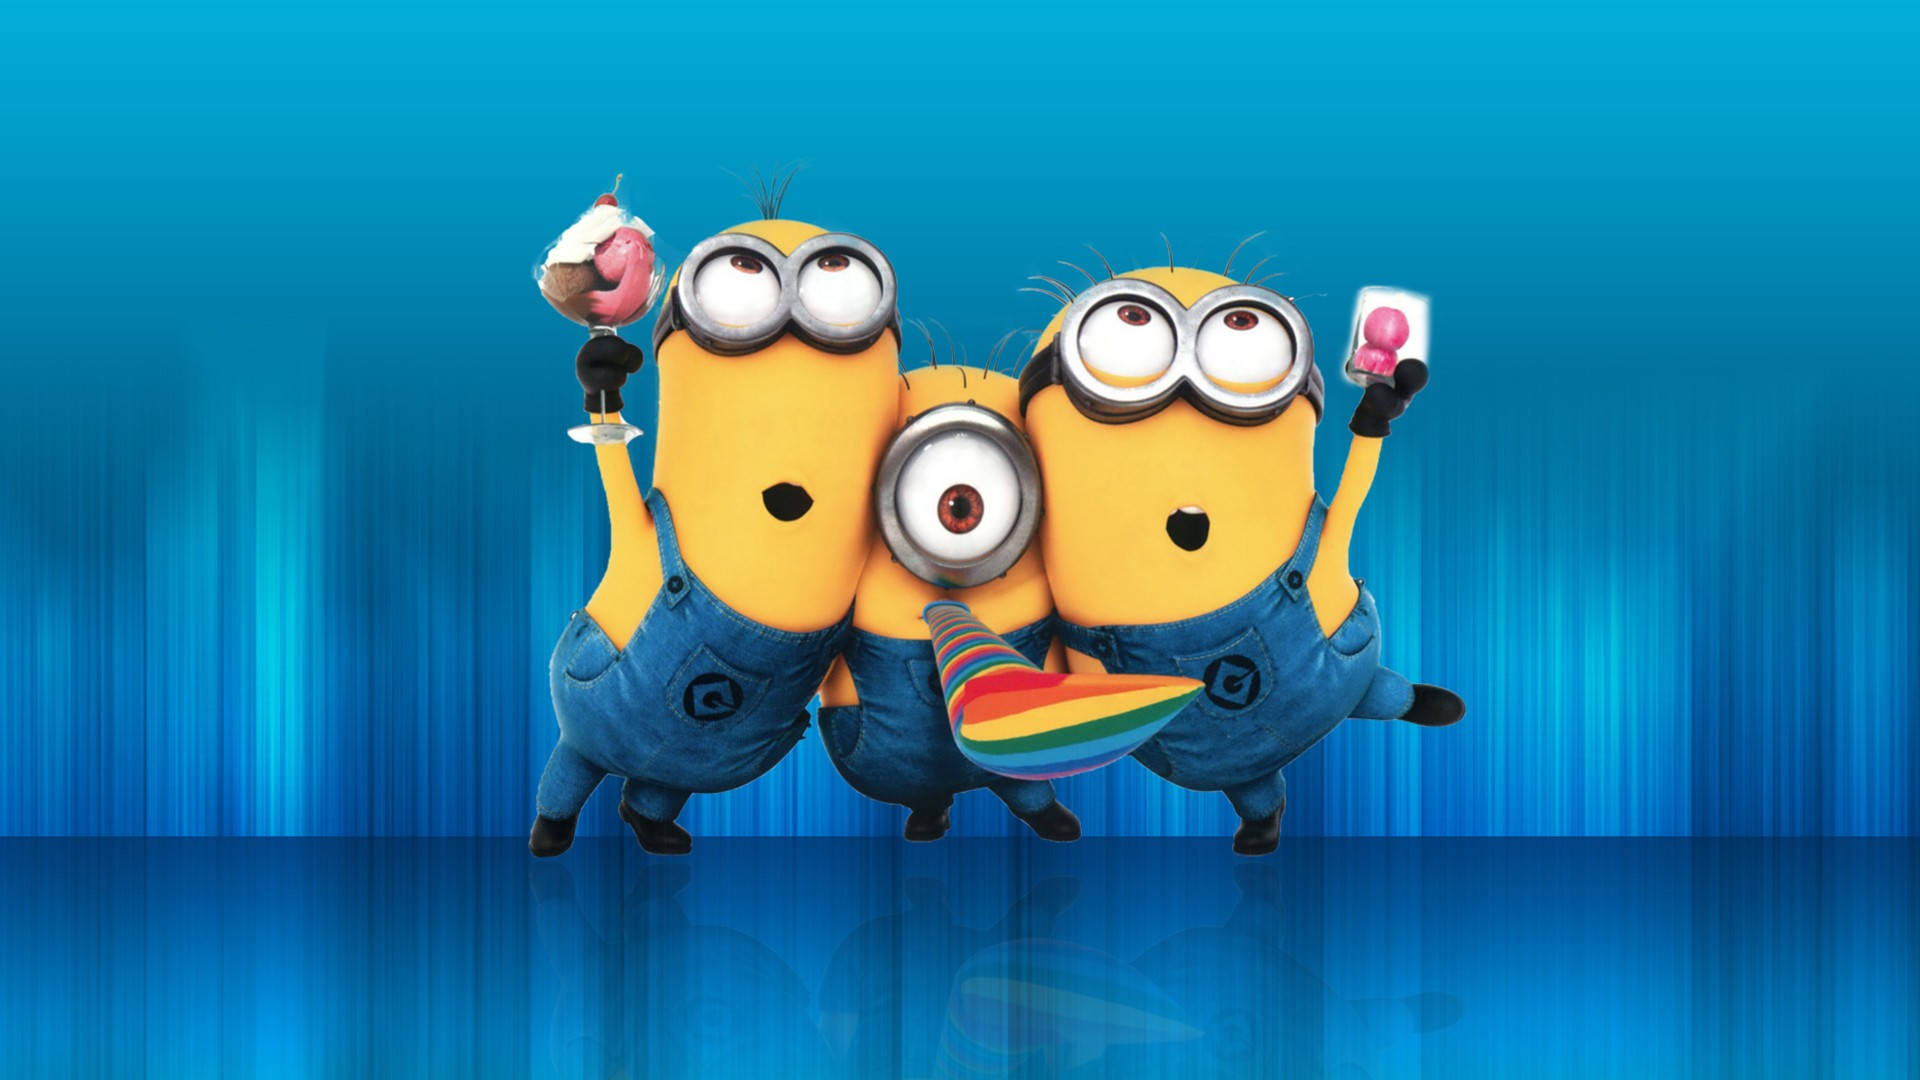 Minions Wallpaper Discover more Despicable Me Film Minion Minions  wallpaper httpswwwix  Cute minions wallpaper Minions wallpaper Minion  wallpaper iphone